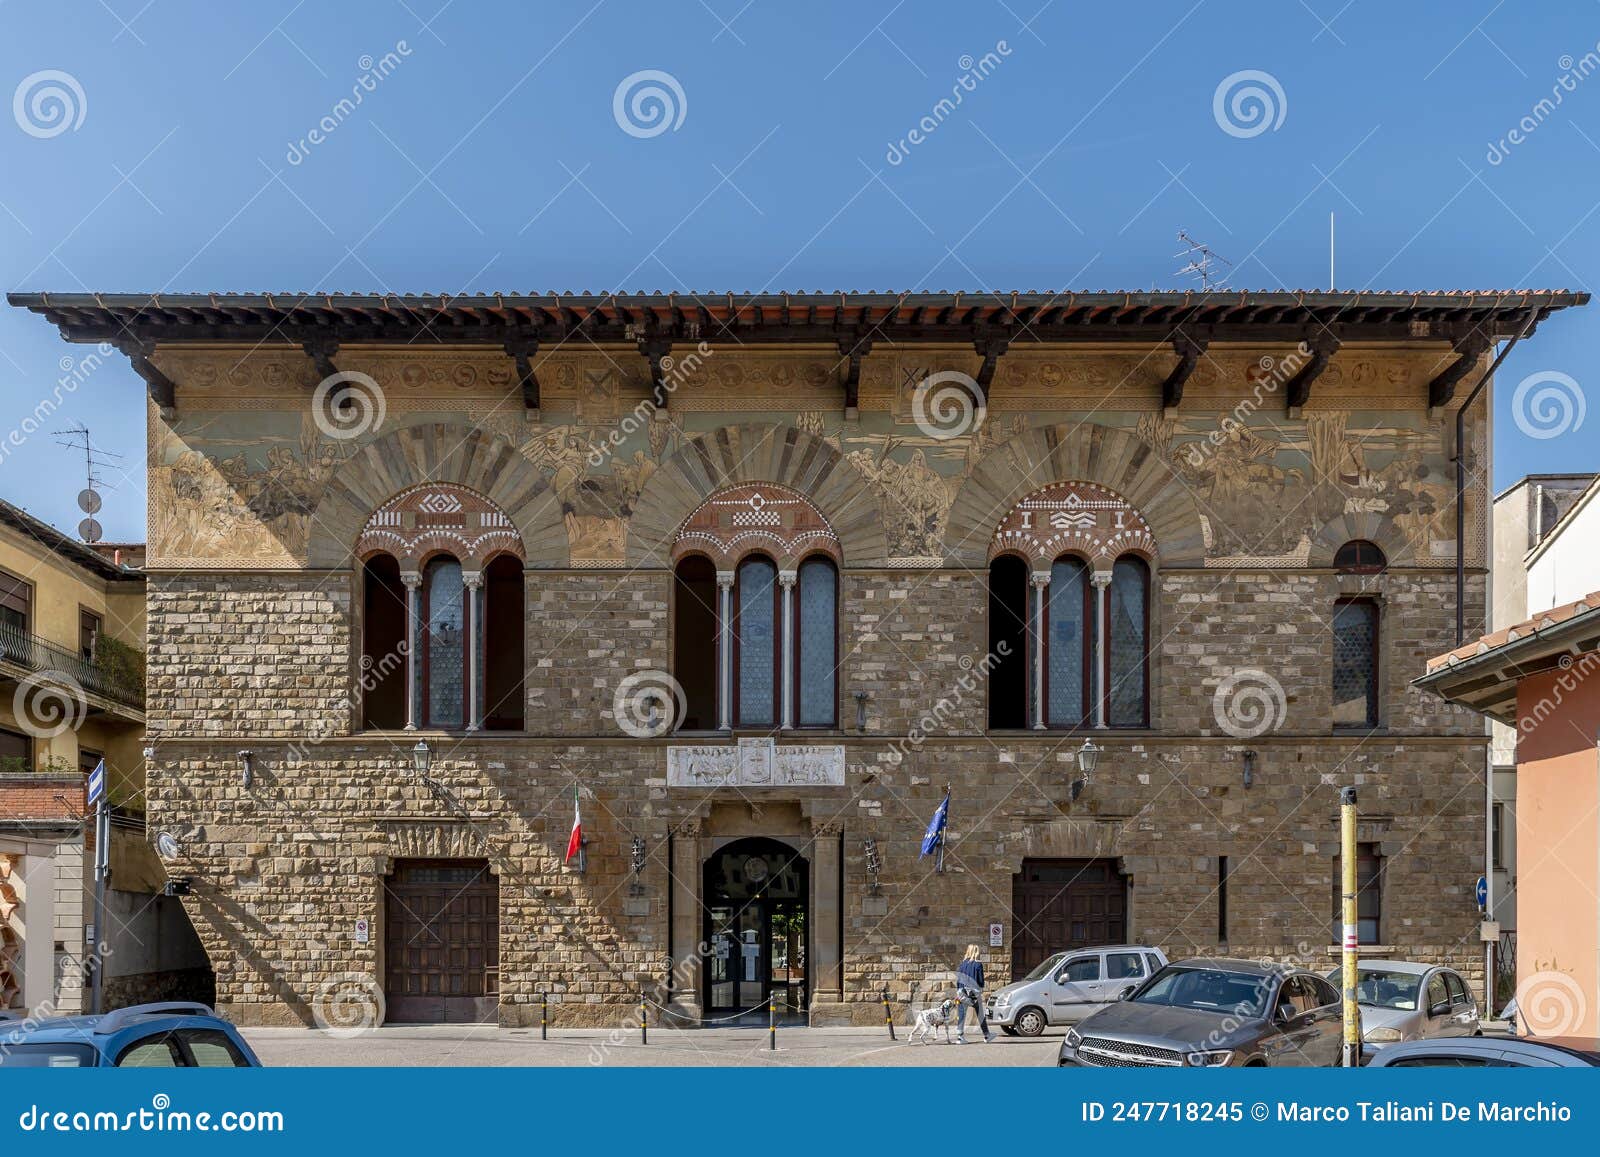 the ancient building of the public assistance l`avvenire in the historical center of prato, italy